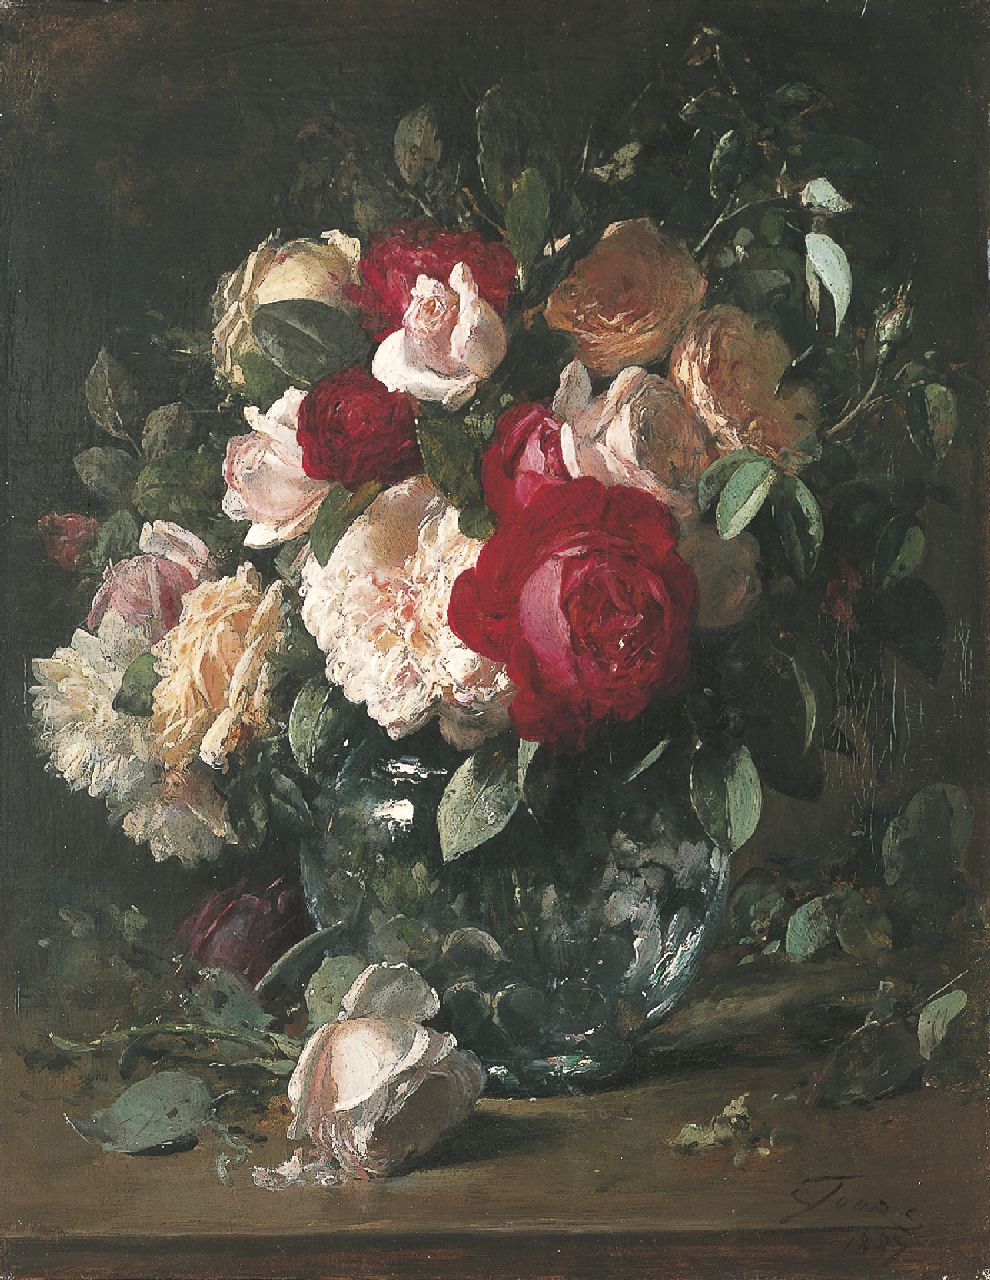 Eugeen Joors | Roses in a glass vase, oil on canvas, 45.5 x 35.6 cm, signed l.r. and dated 1887